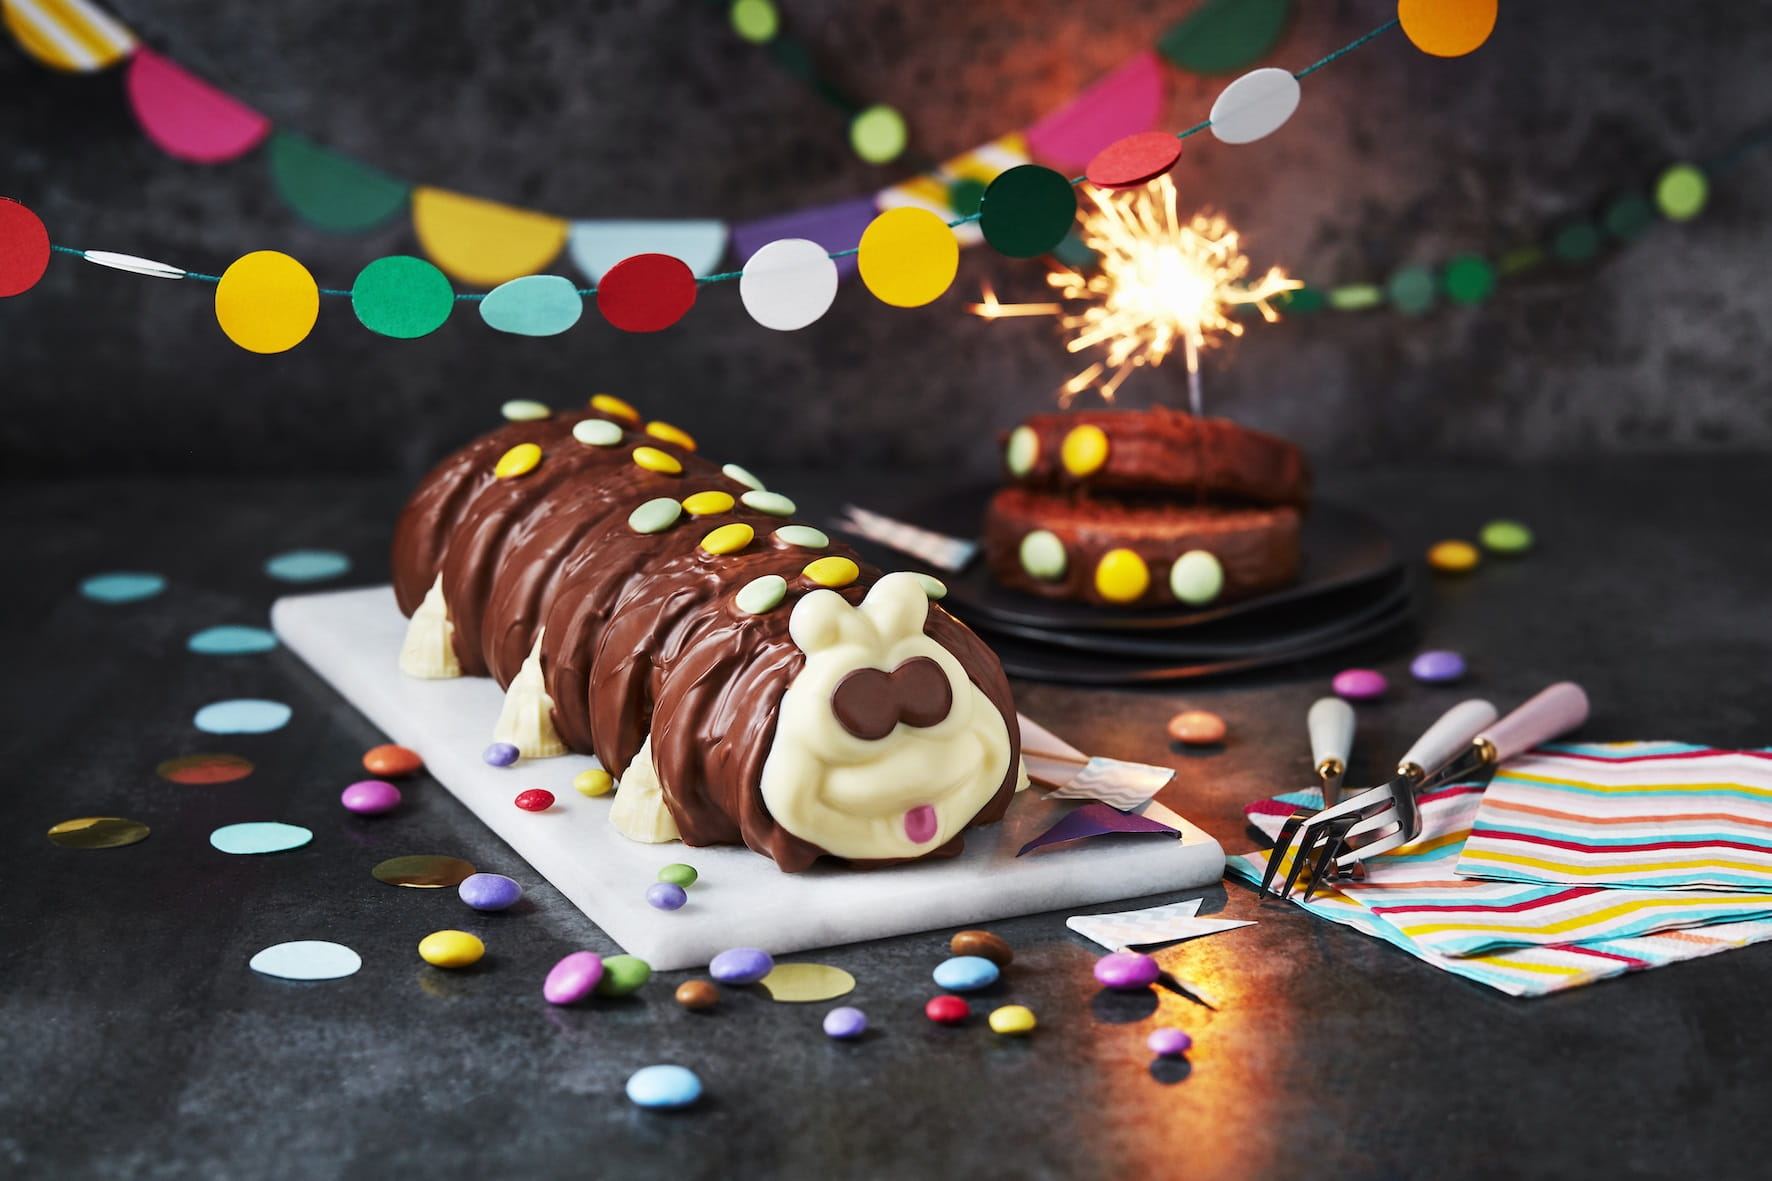 The case of the caterpillar cakes: why legal protection for a shape is so hard to come by